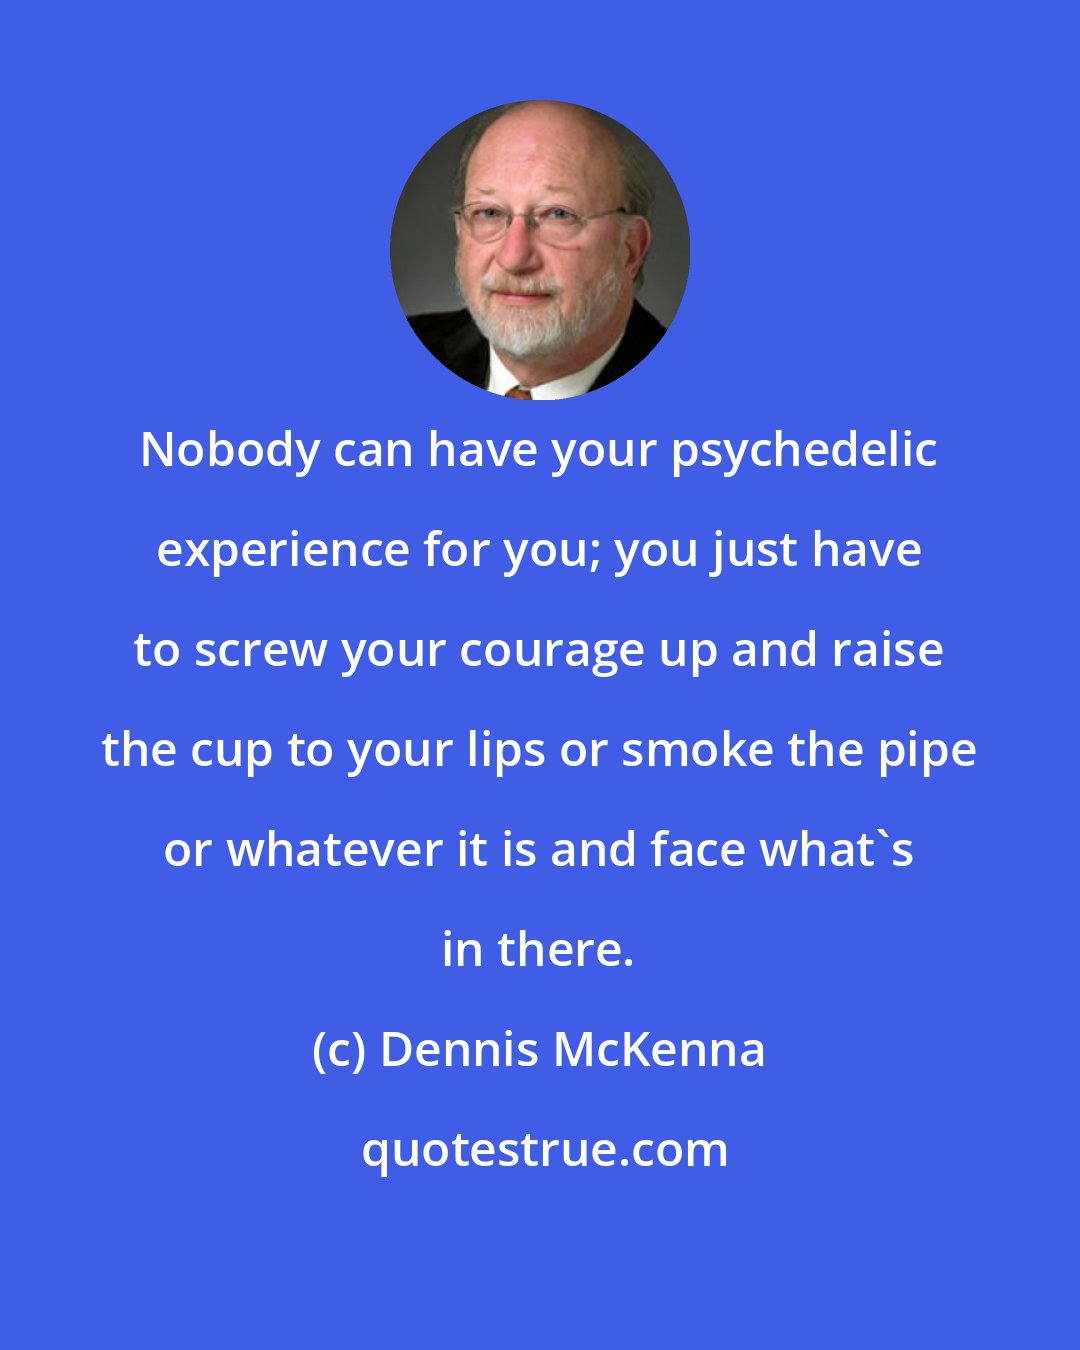 Dennis McKenna: Nobody can have your psychedelic experience for you; you just have to screw your courage up and raise the cup to your lips or smoke the pipe or whatever it is and face what's in there.